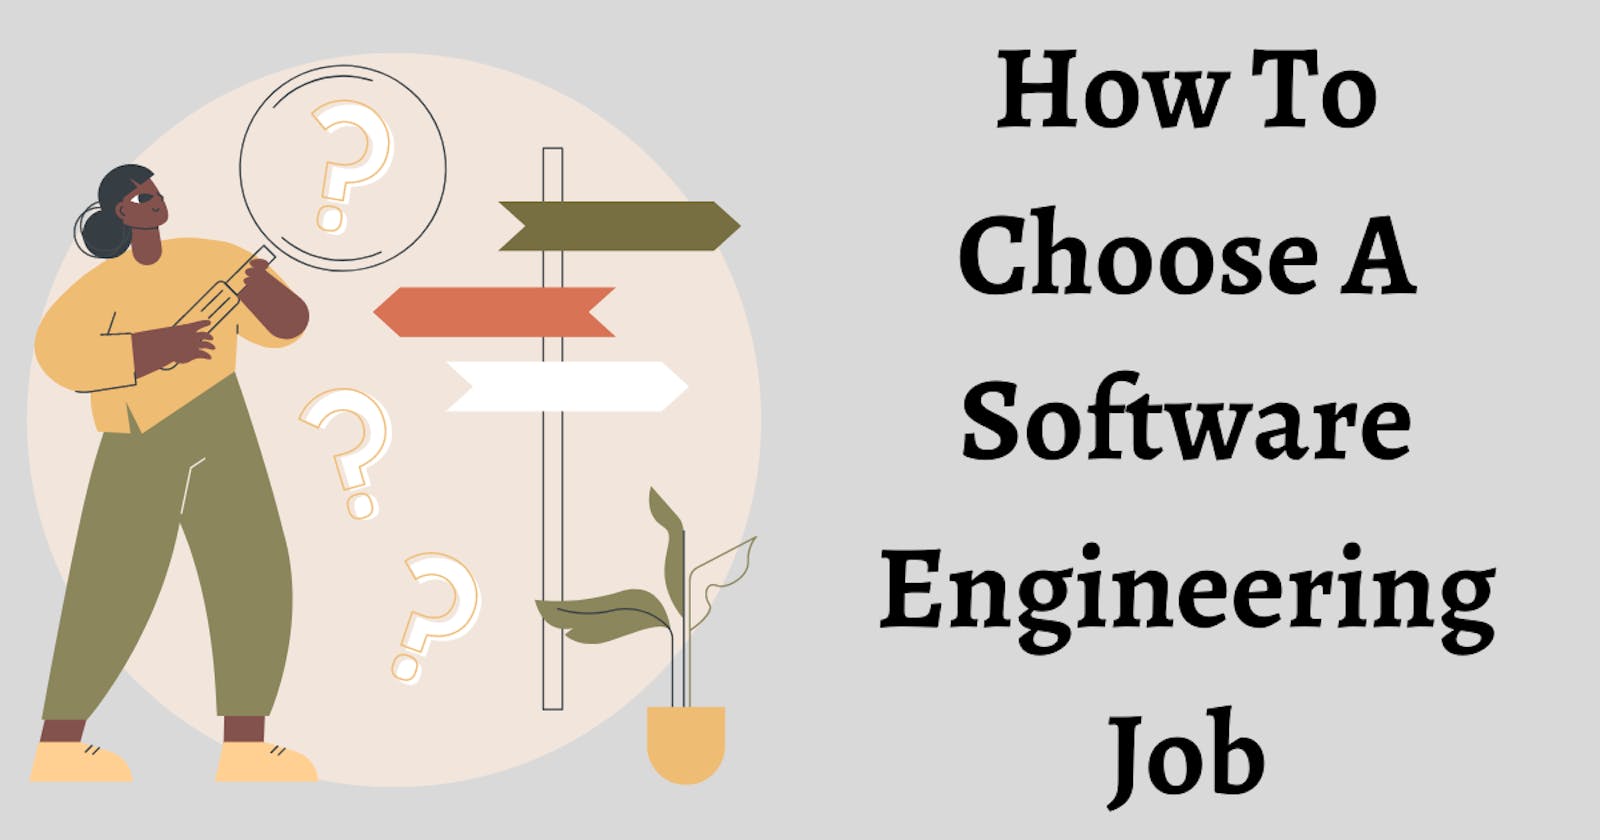 How To Choose A Software Engineering Job